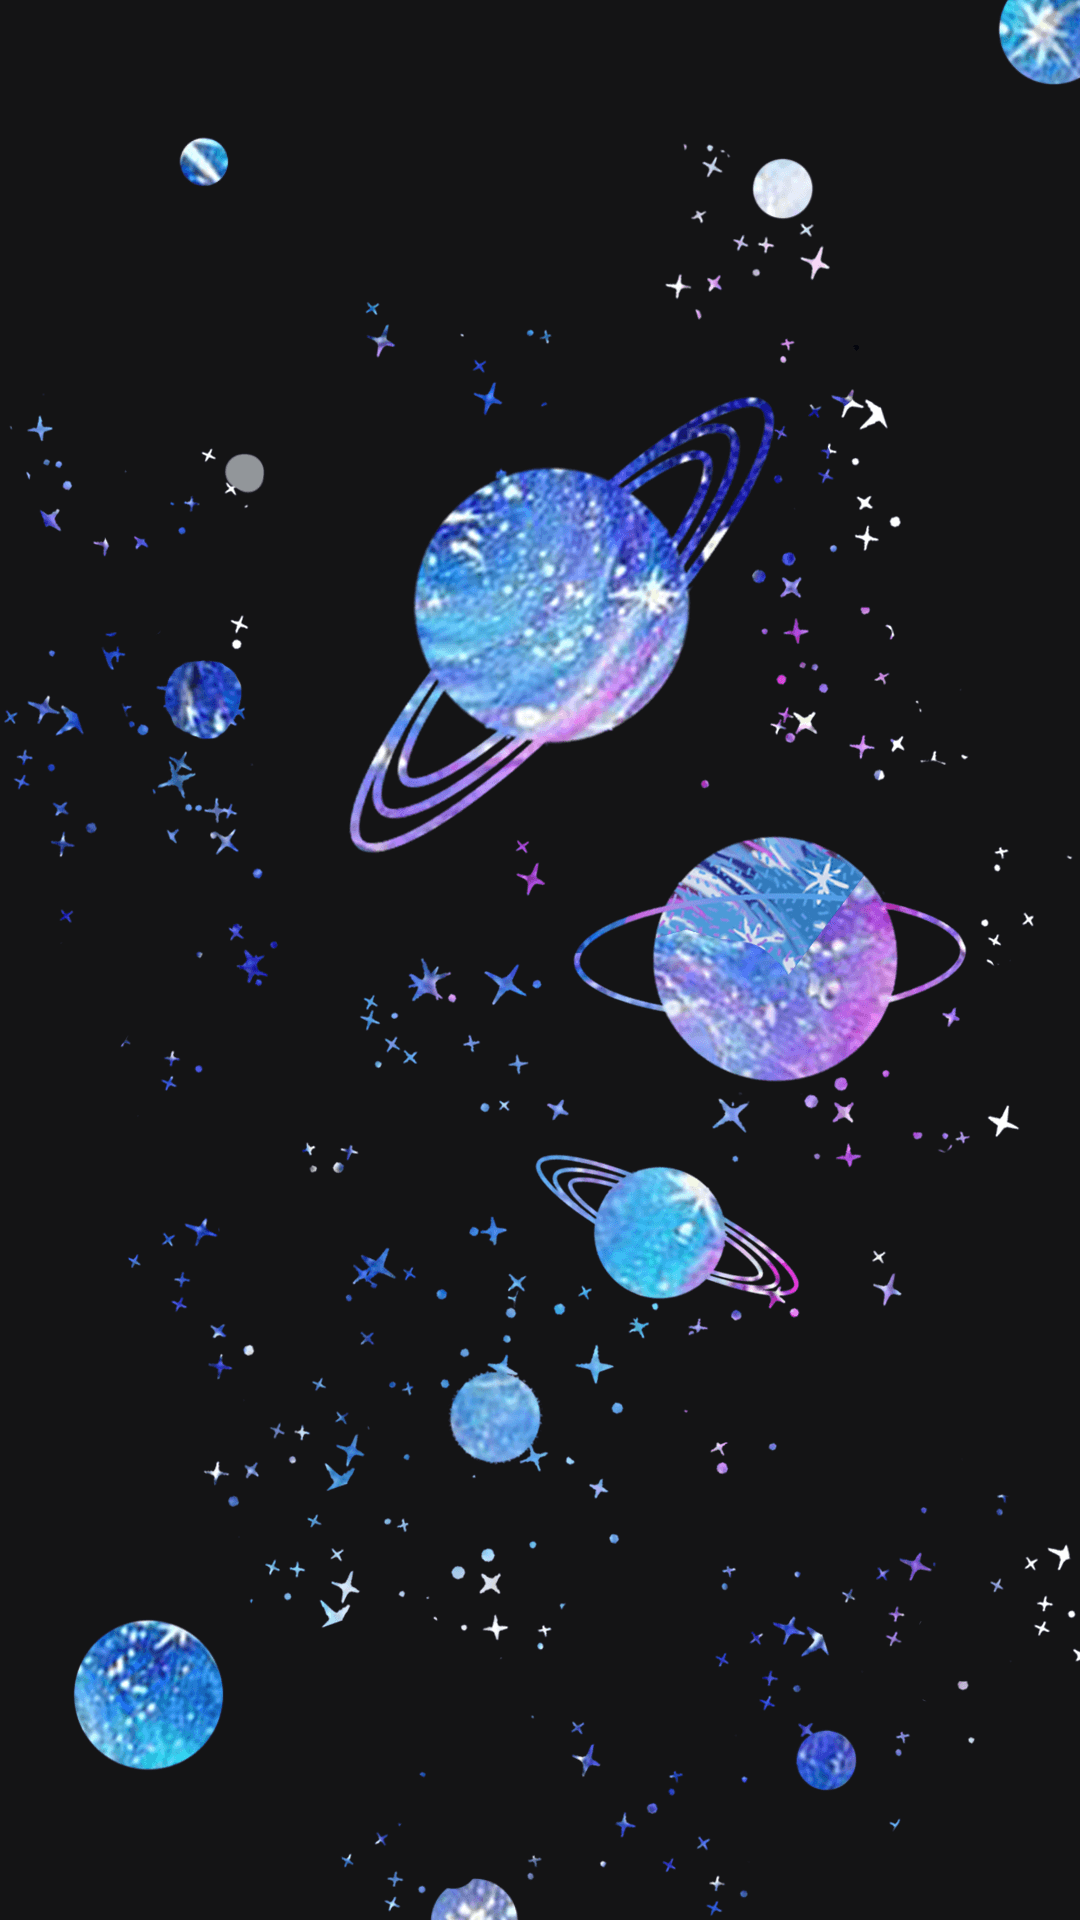 Space wallpaper for your phone and desktop! - Space, planet